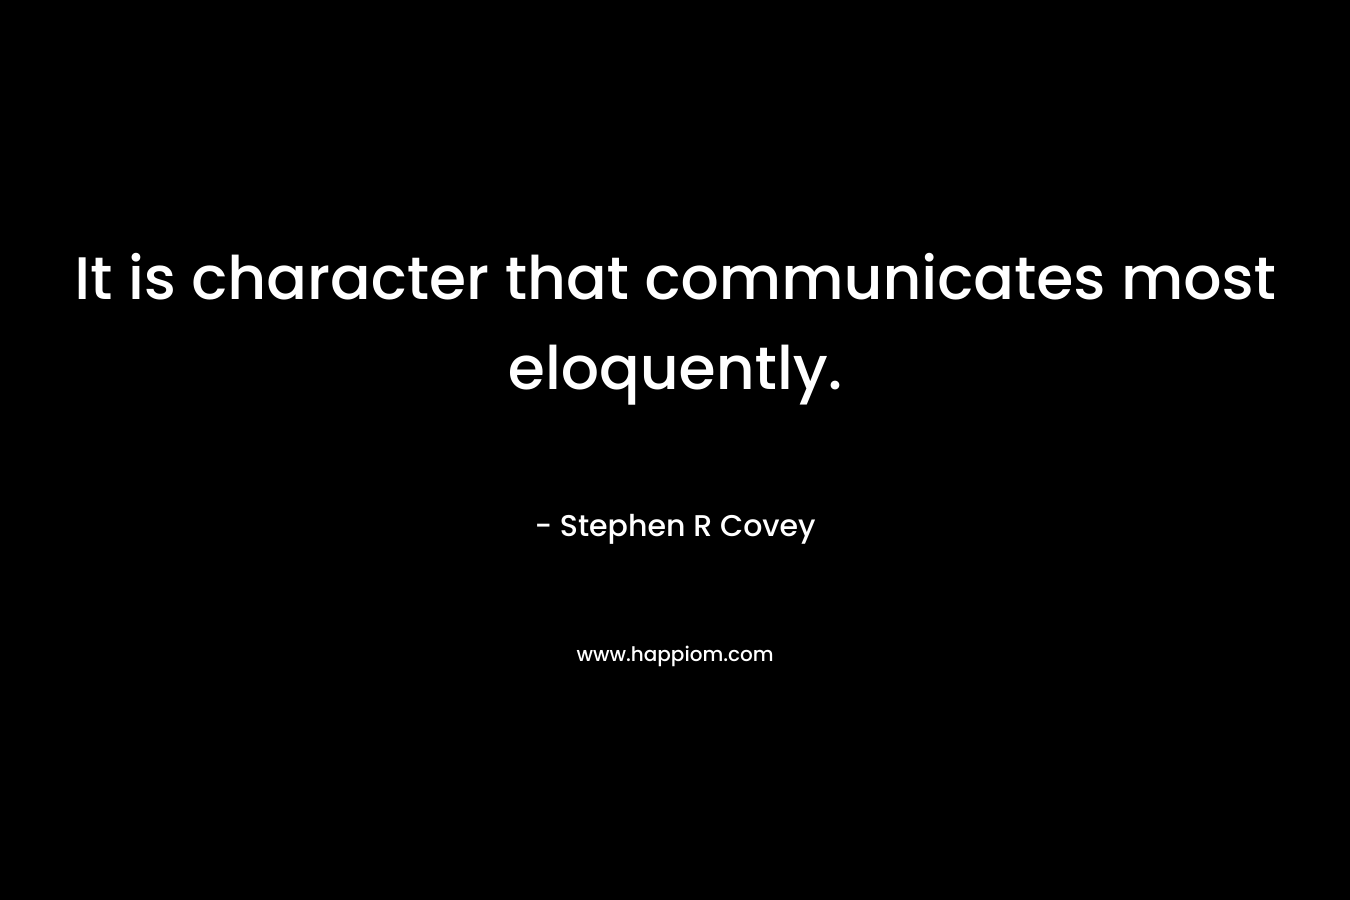 It is character that communicates most eloquently.